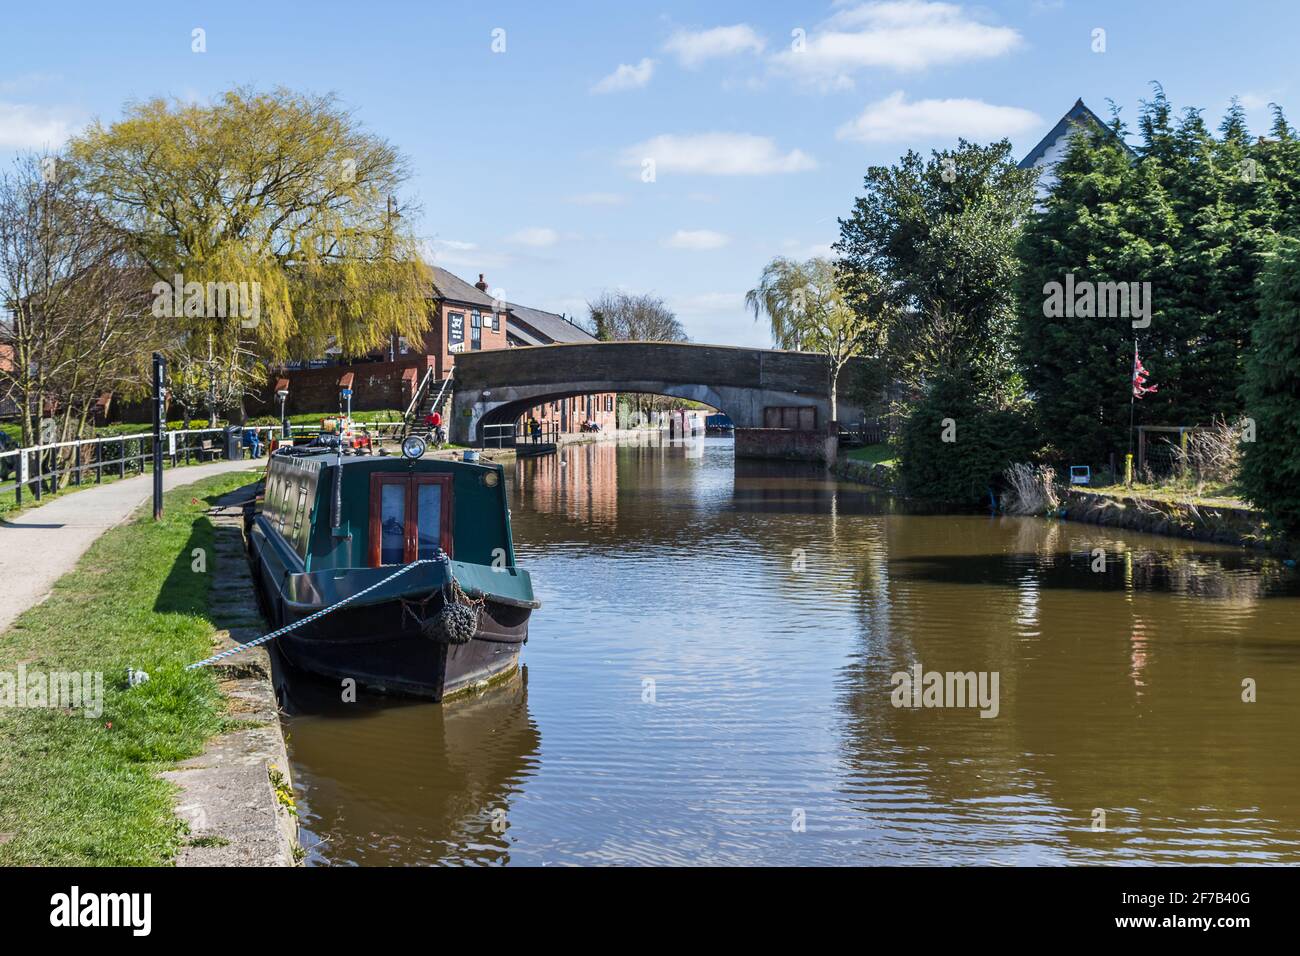 The Leeds Liverpool Canal passes throug Burscough, Lancashire in April 2021 seen from the tow path. Stock Photo